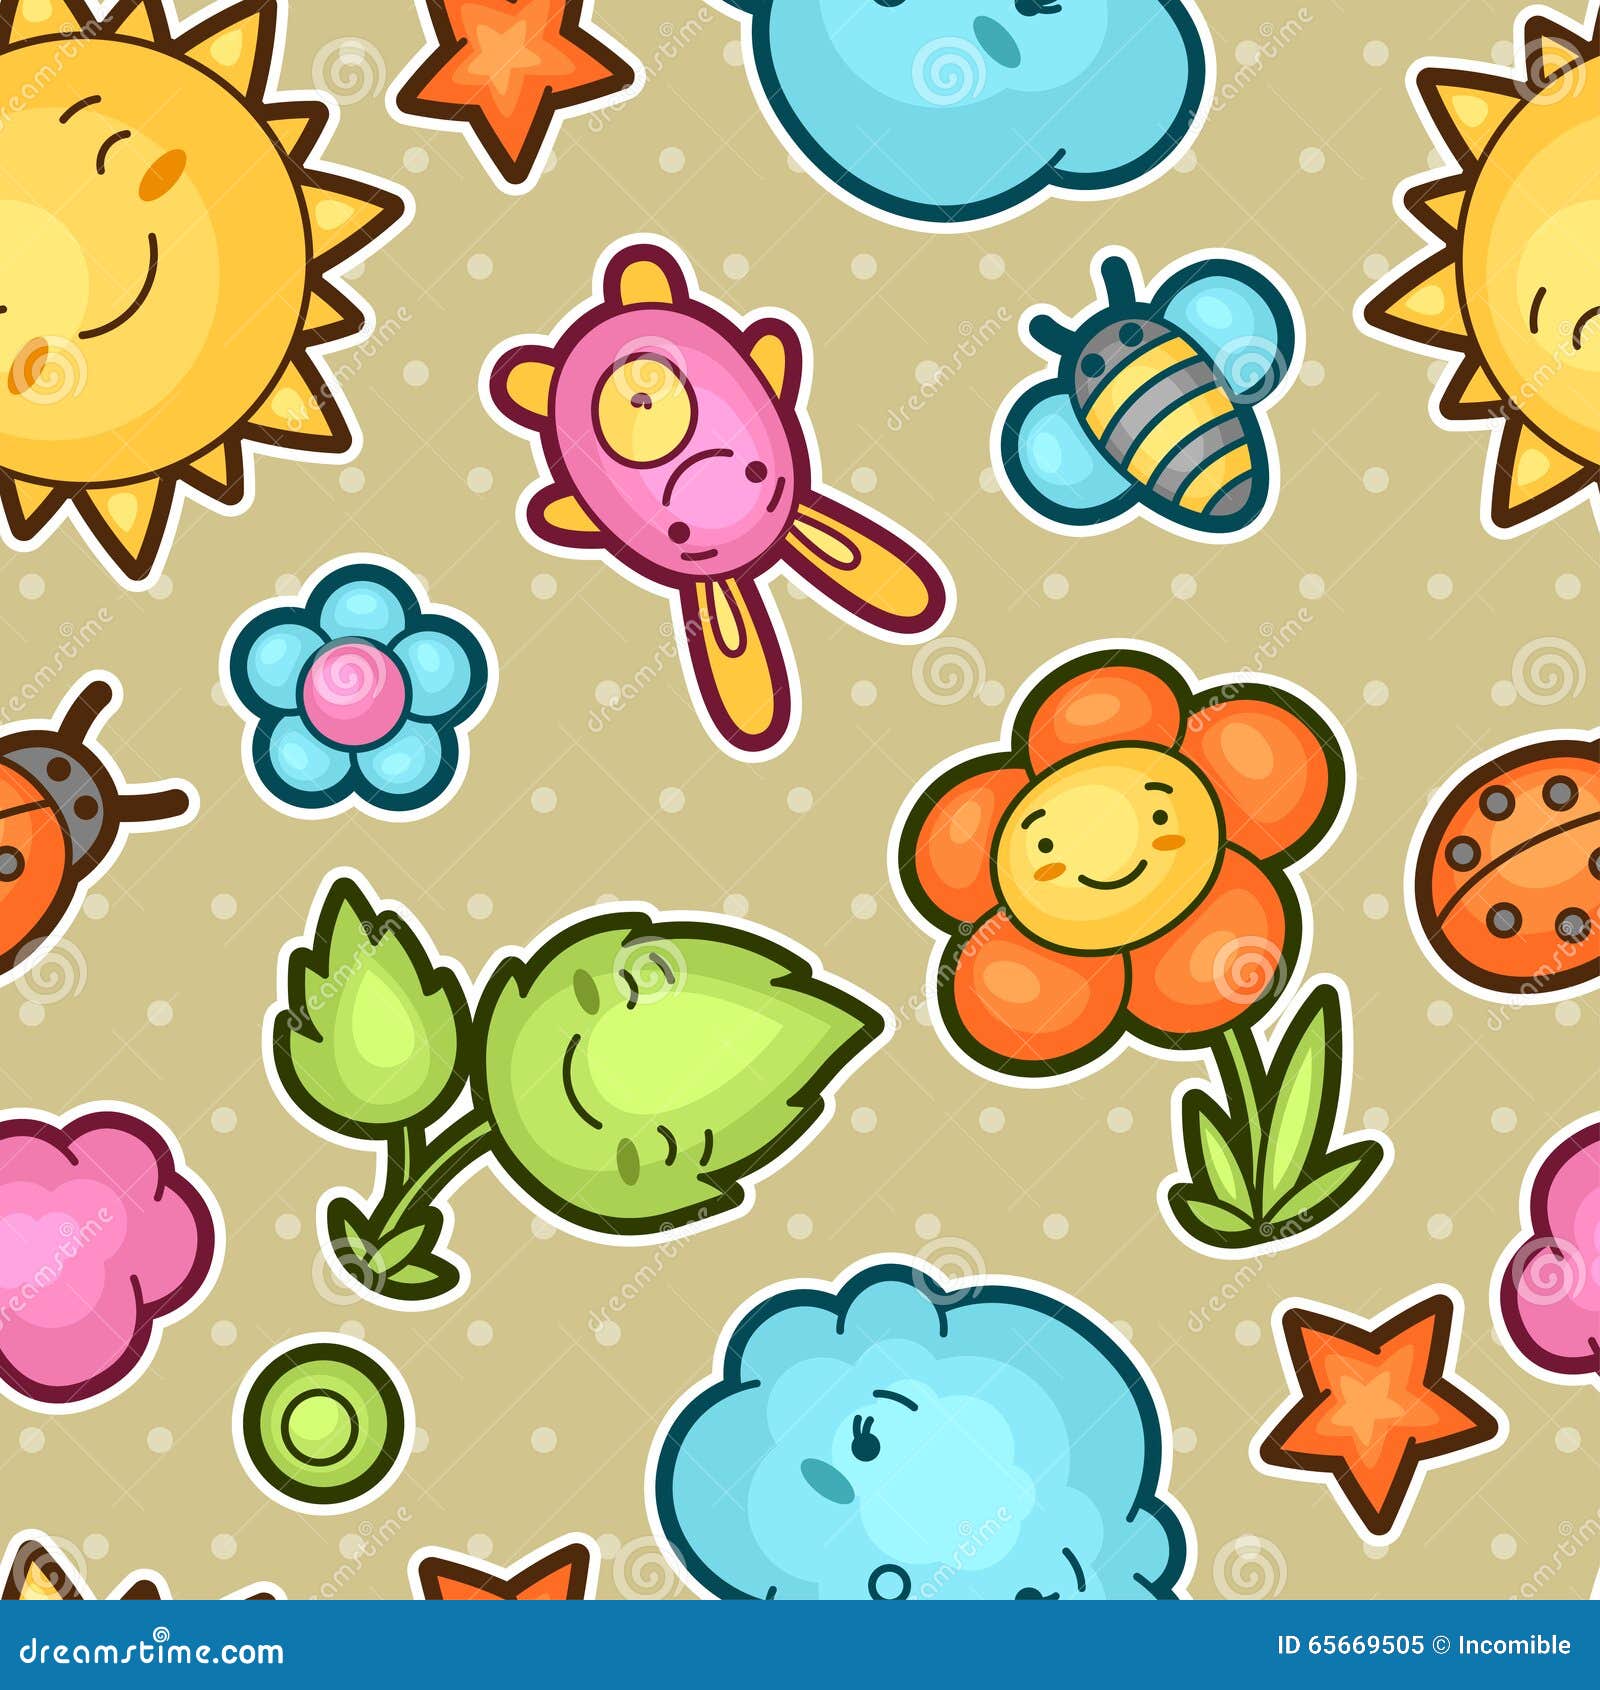 Seamless Kawaii Child Pattern With Cute Doodles Spring Collection